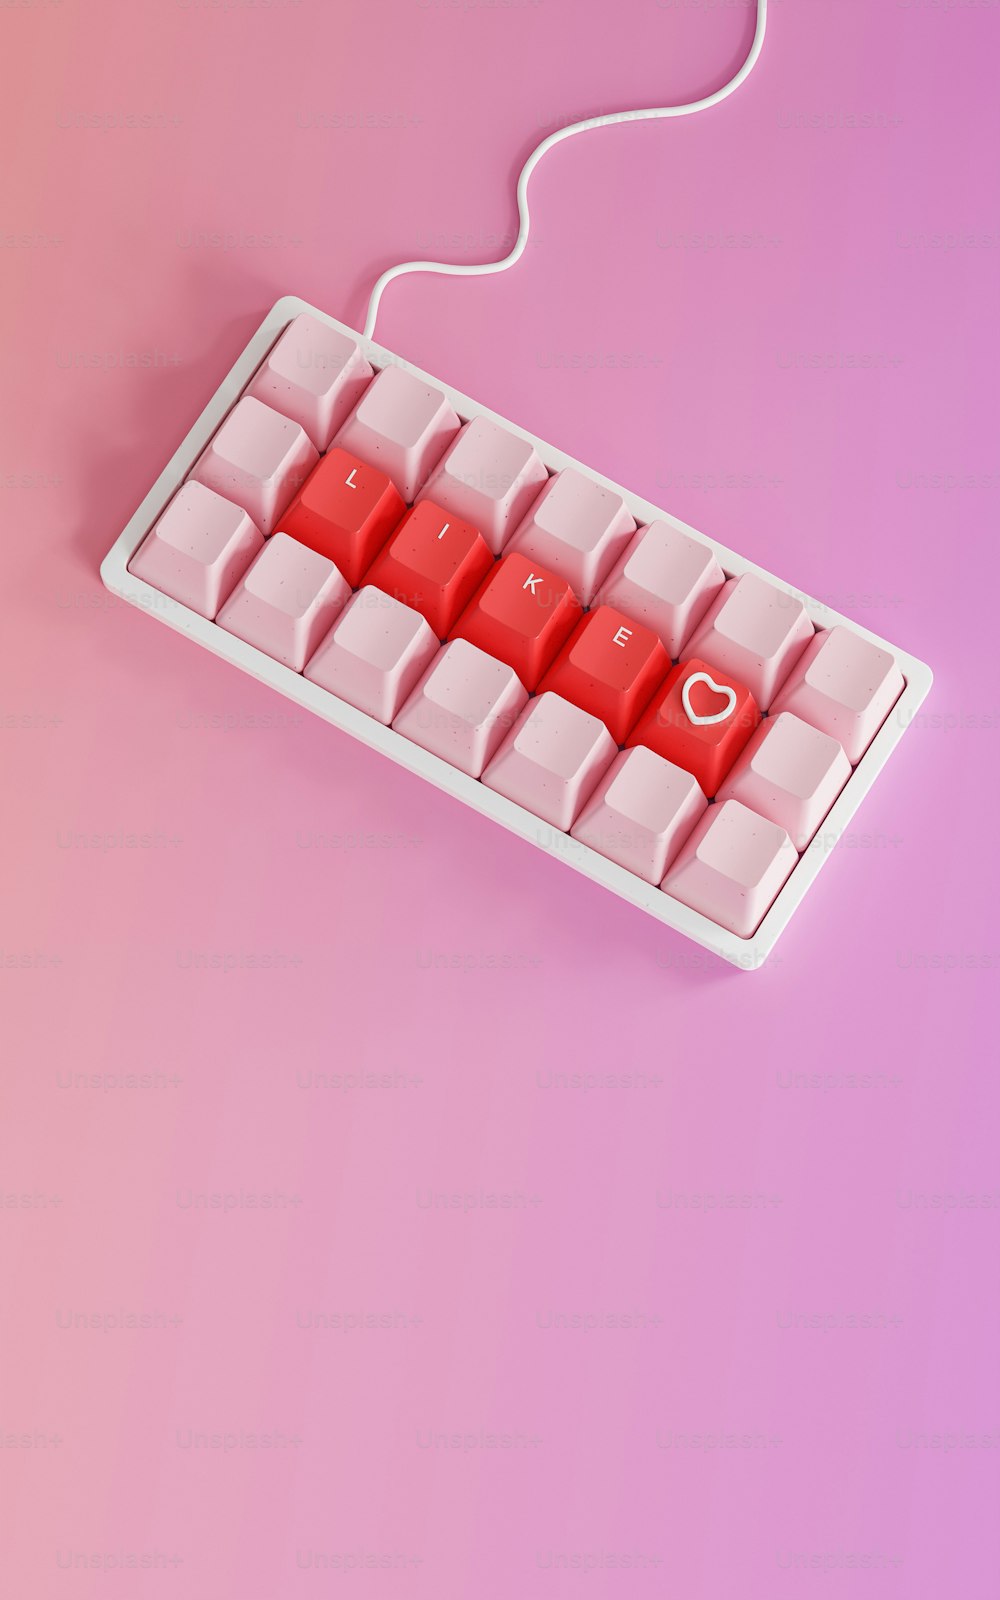 a red keyboard with a heart on it